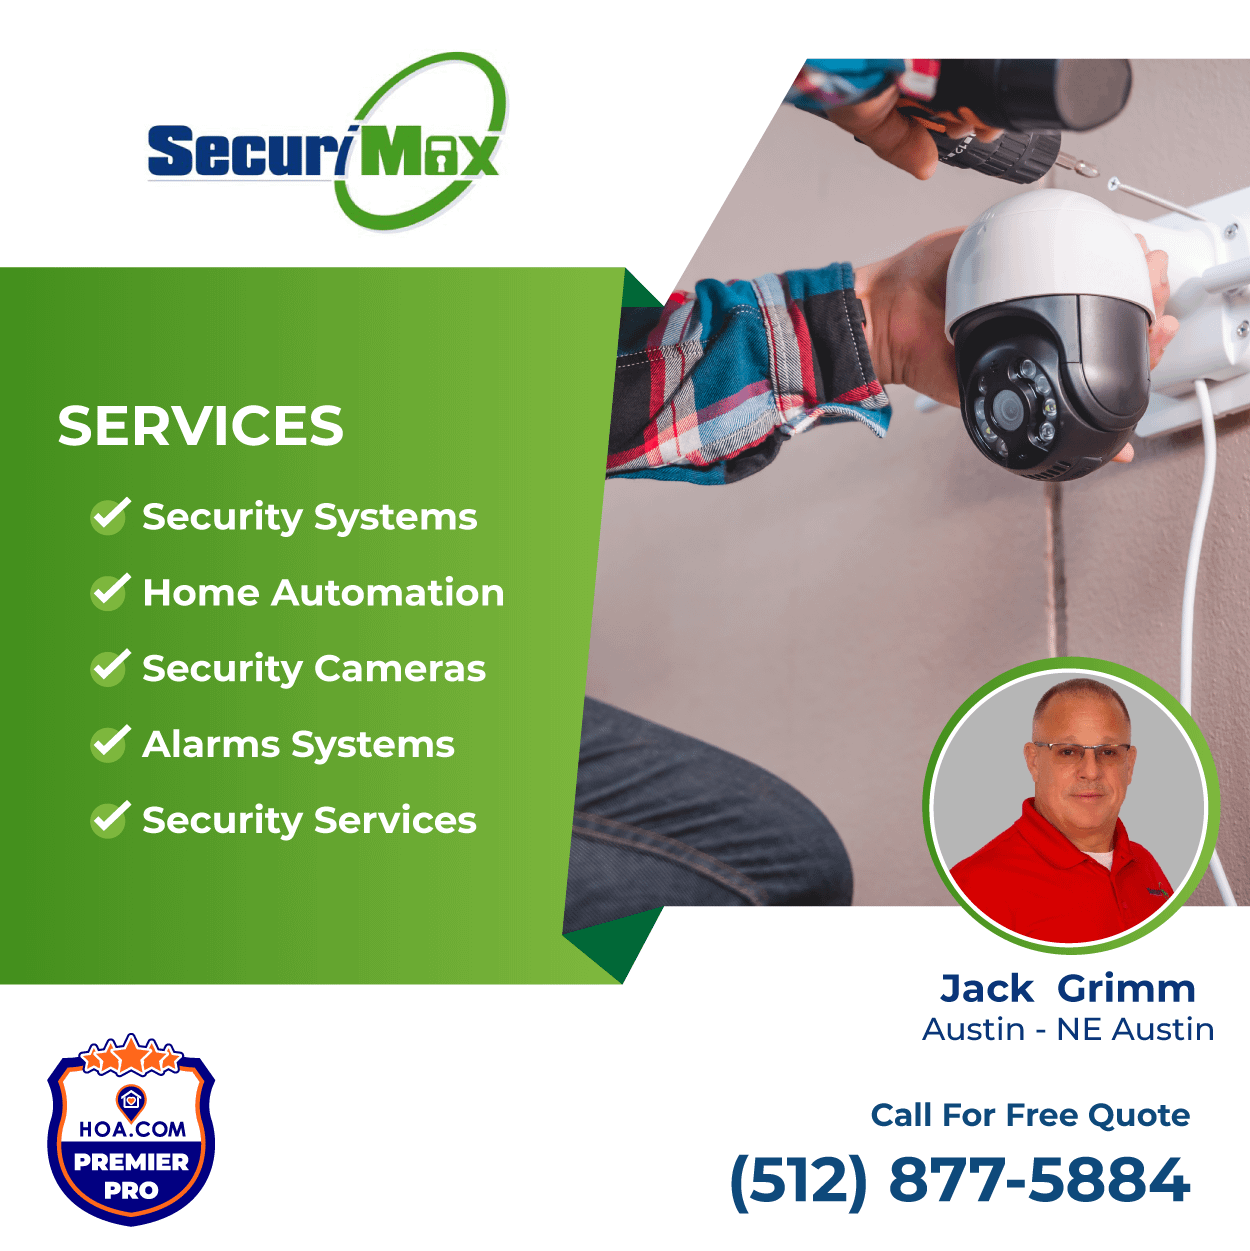 Services From Securimax